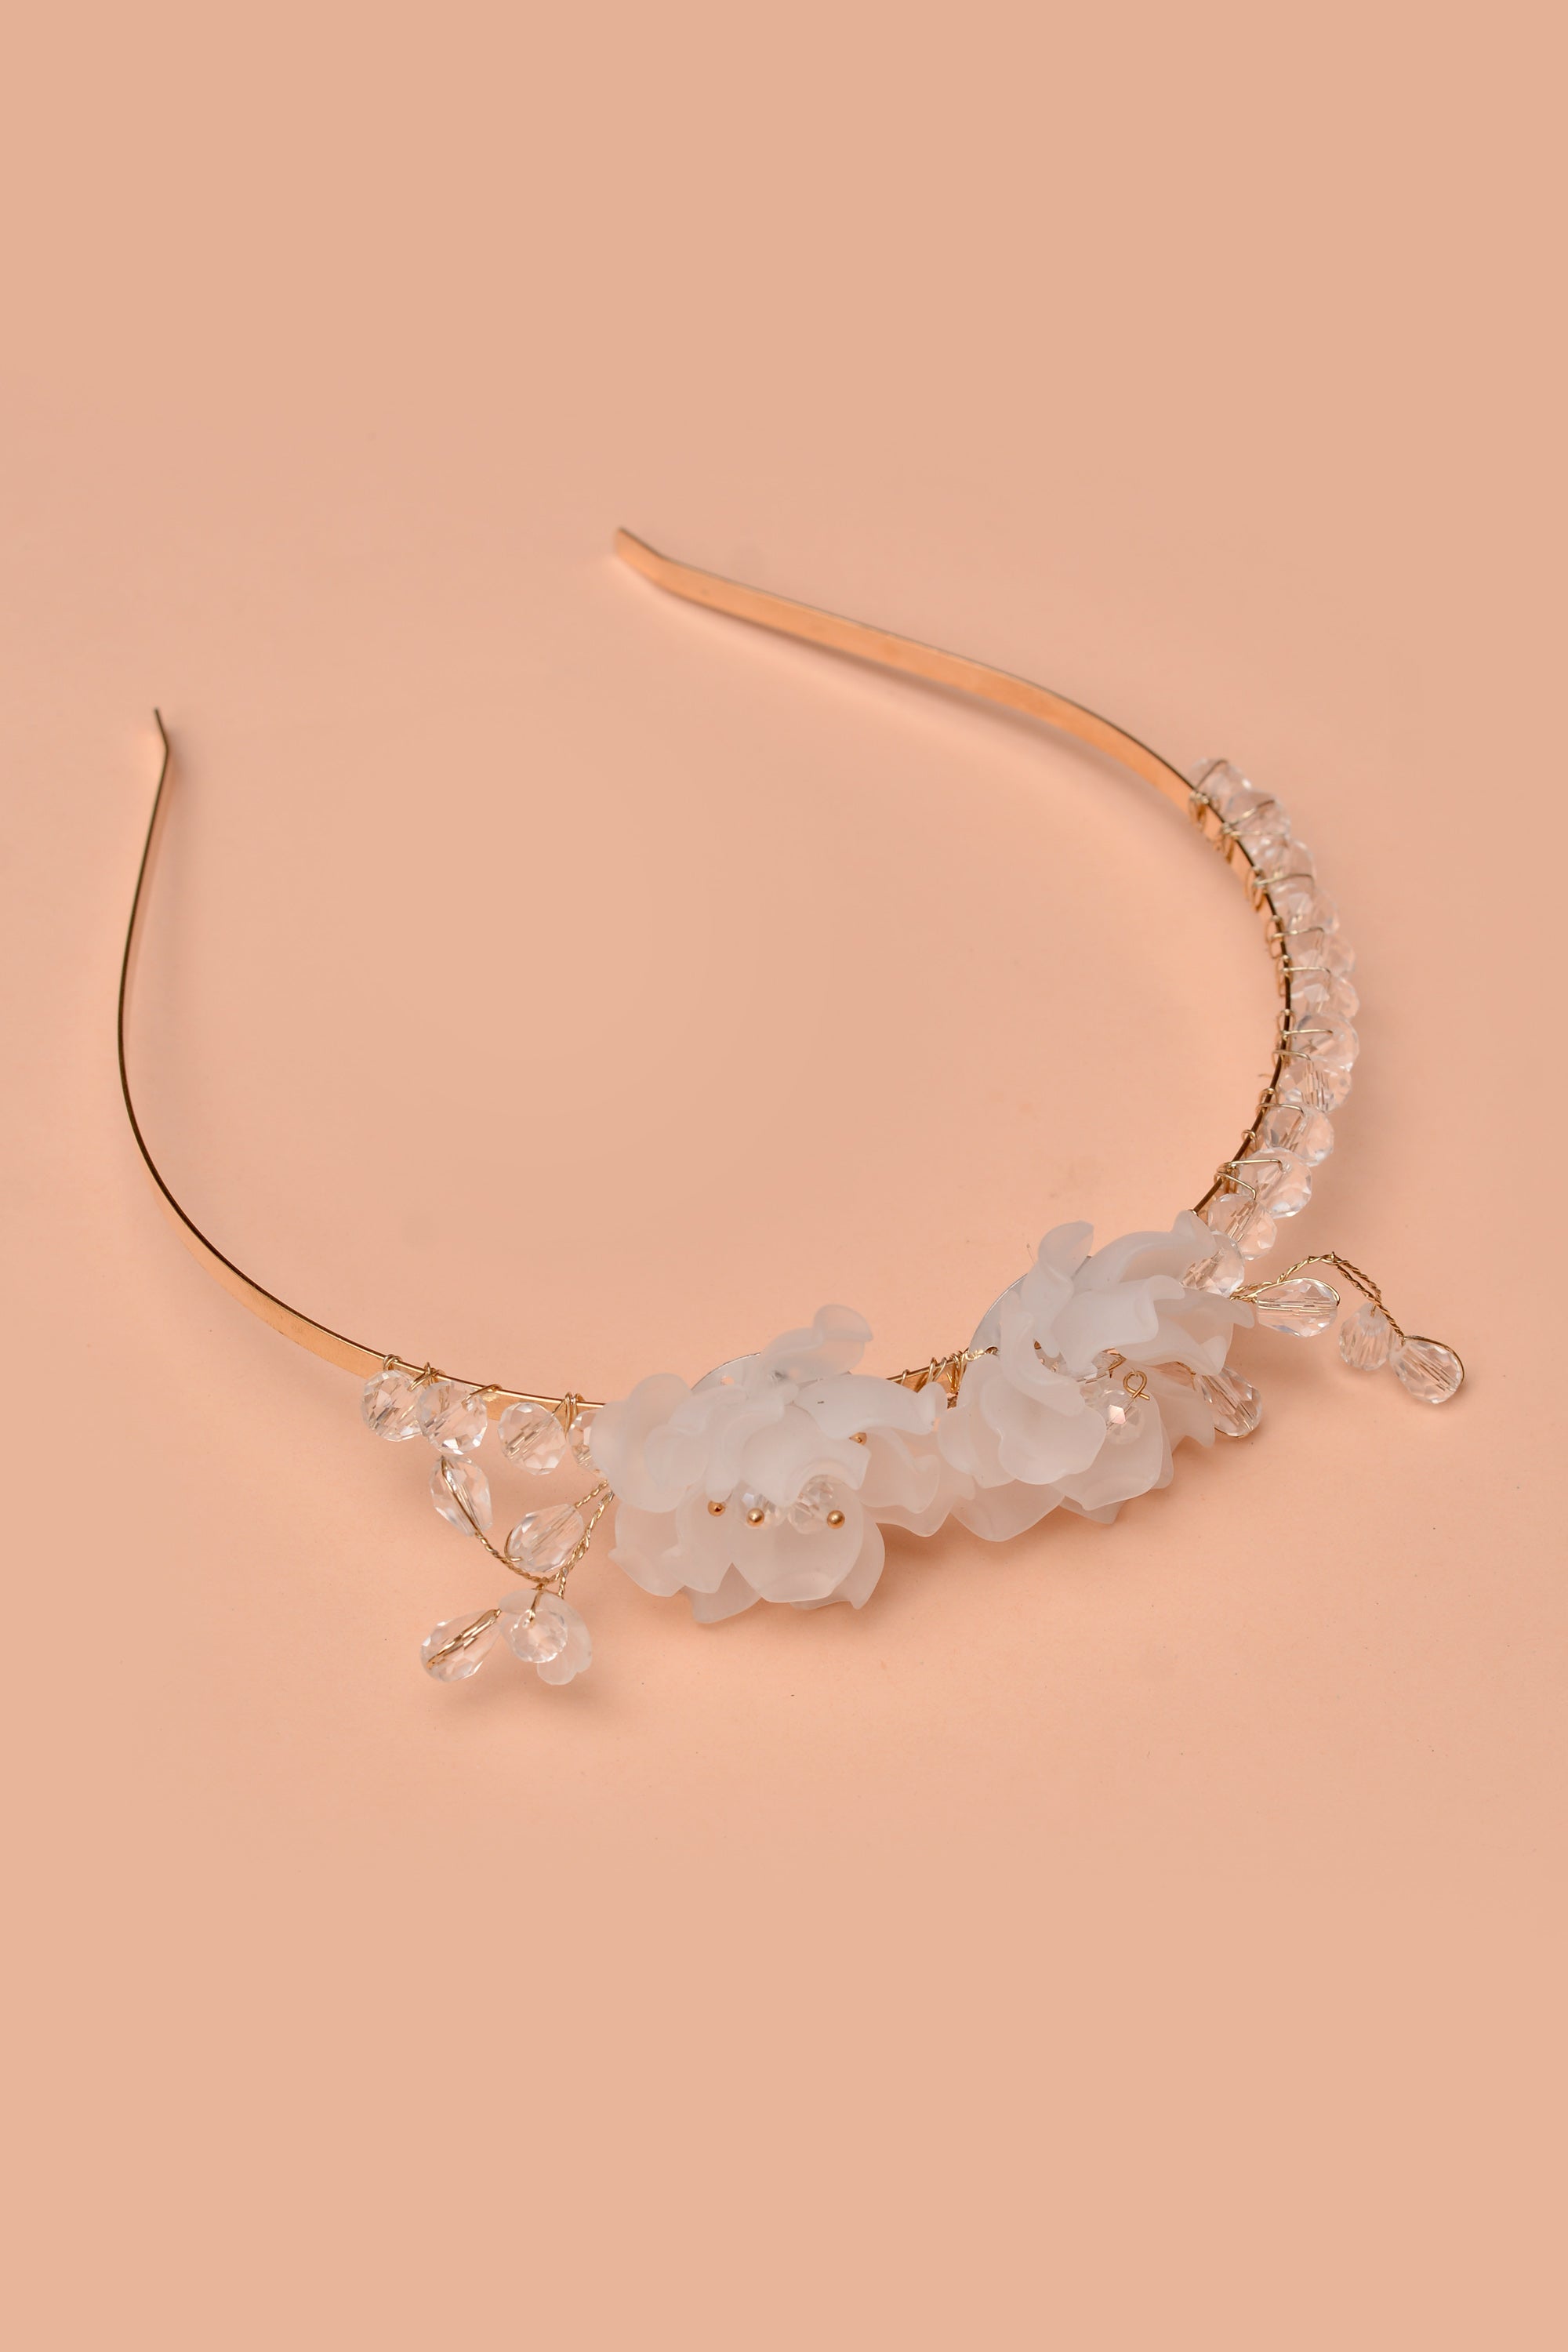 Party Wear White Hair Accessories